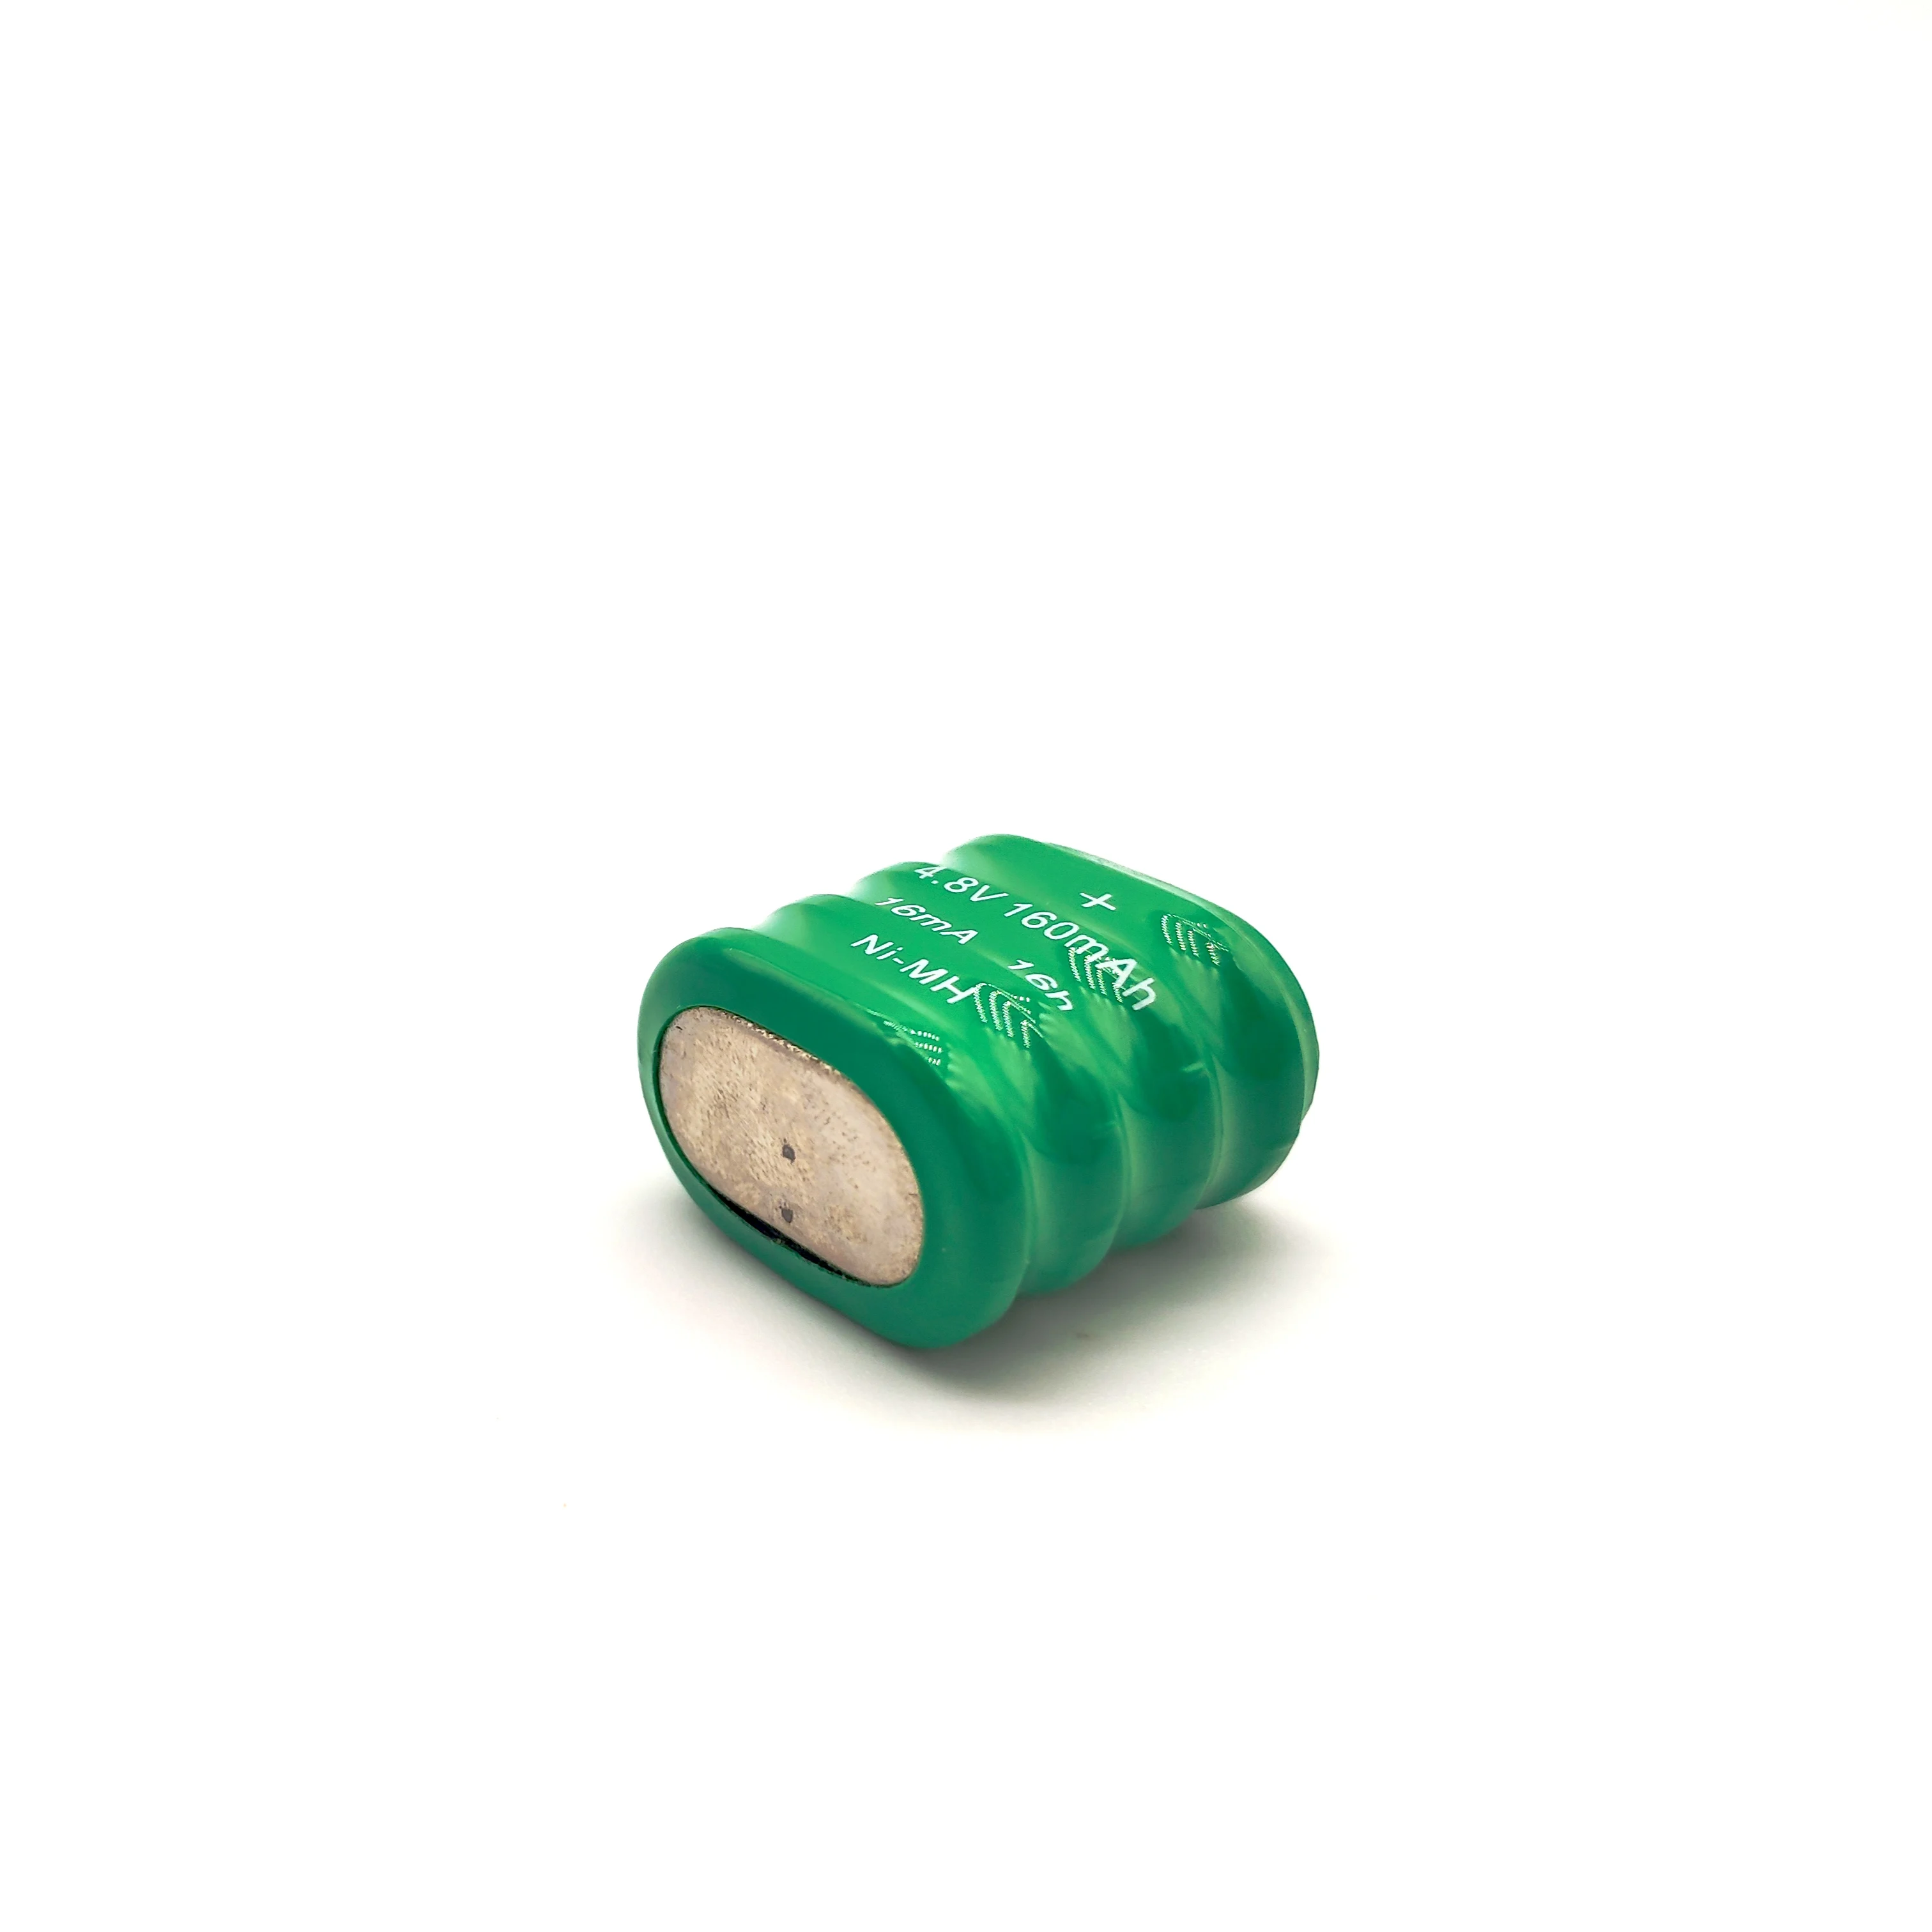 Rechargeable Ni-MH 4.8V 160mAh battery for toy